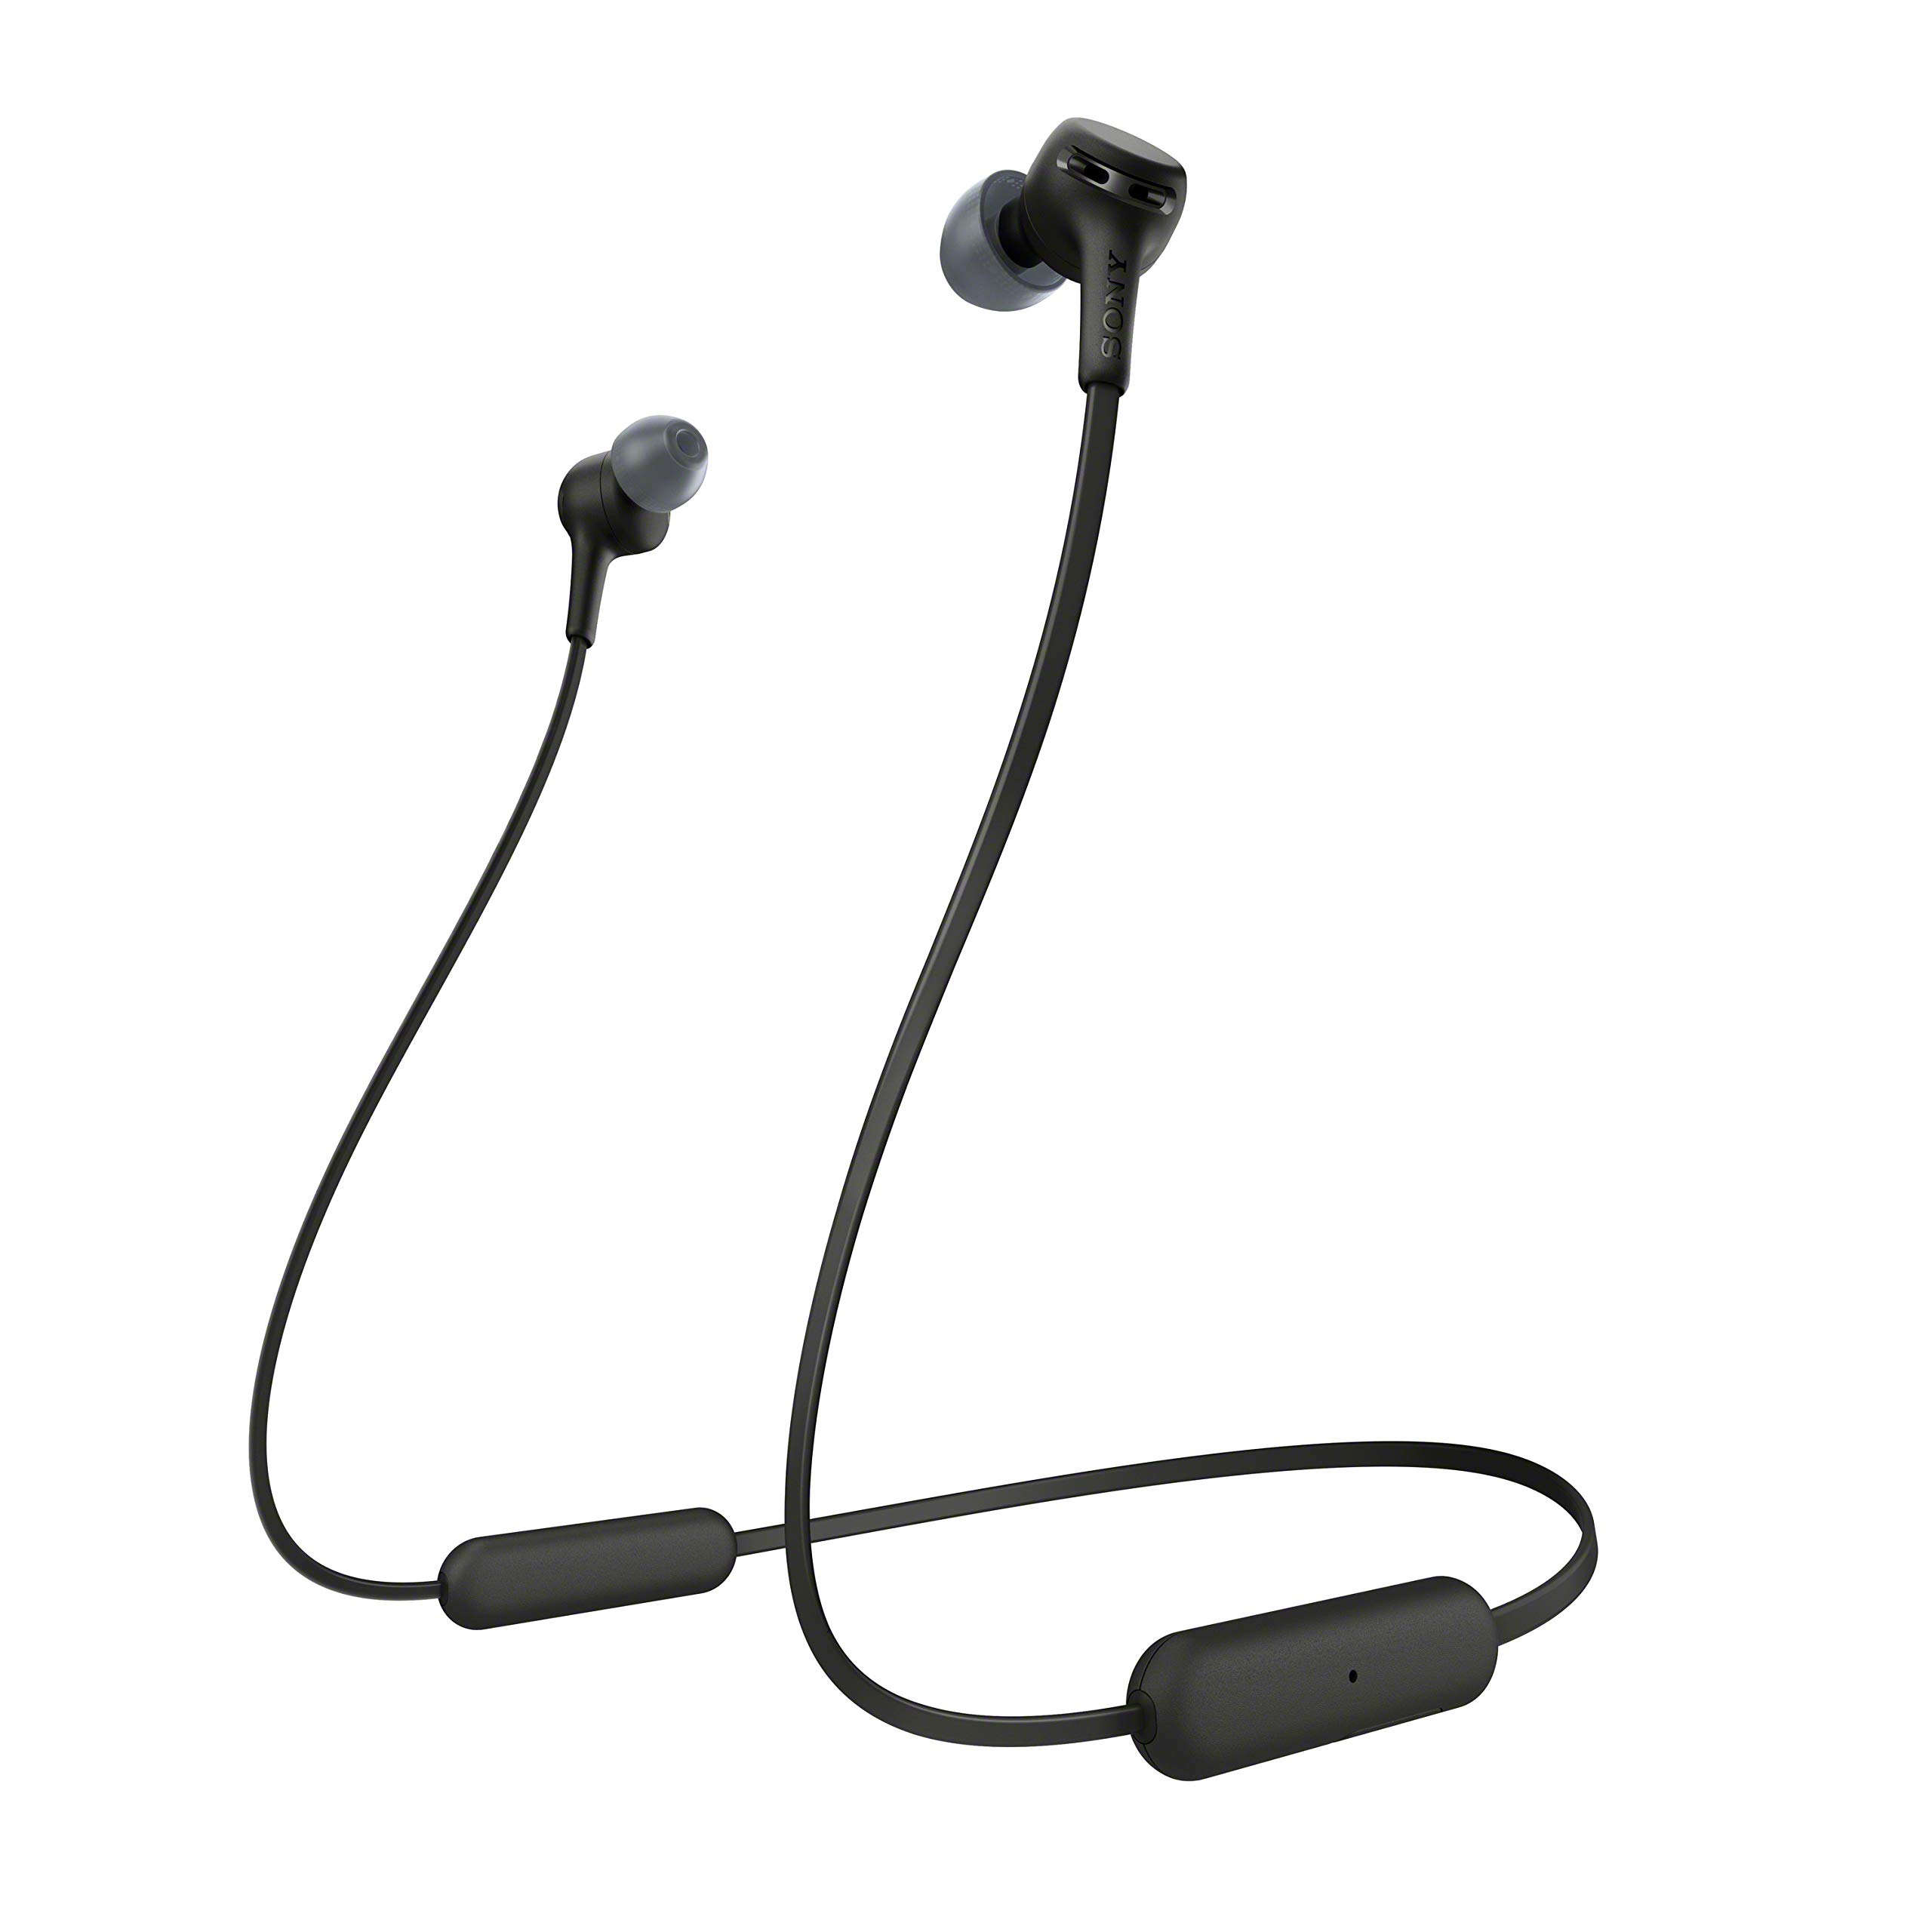 Sony WI-XB400 Wireless In-Ear Extra Bass Headset/Headphones with mic for phone call, Black